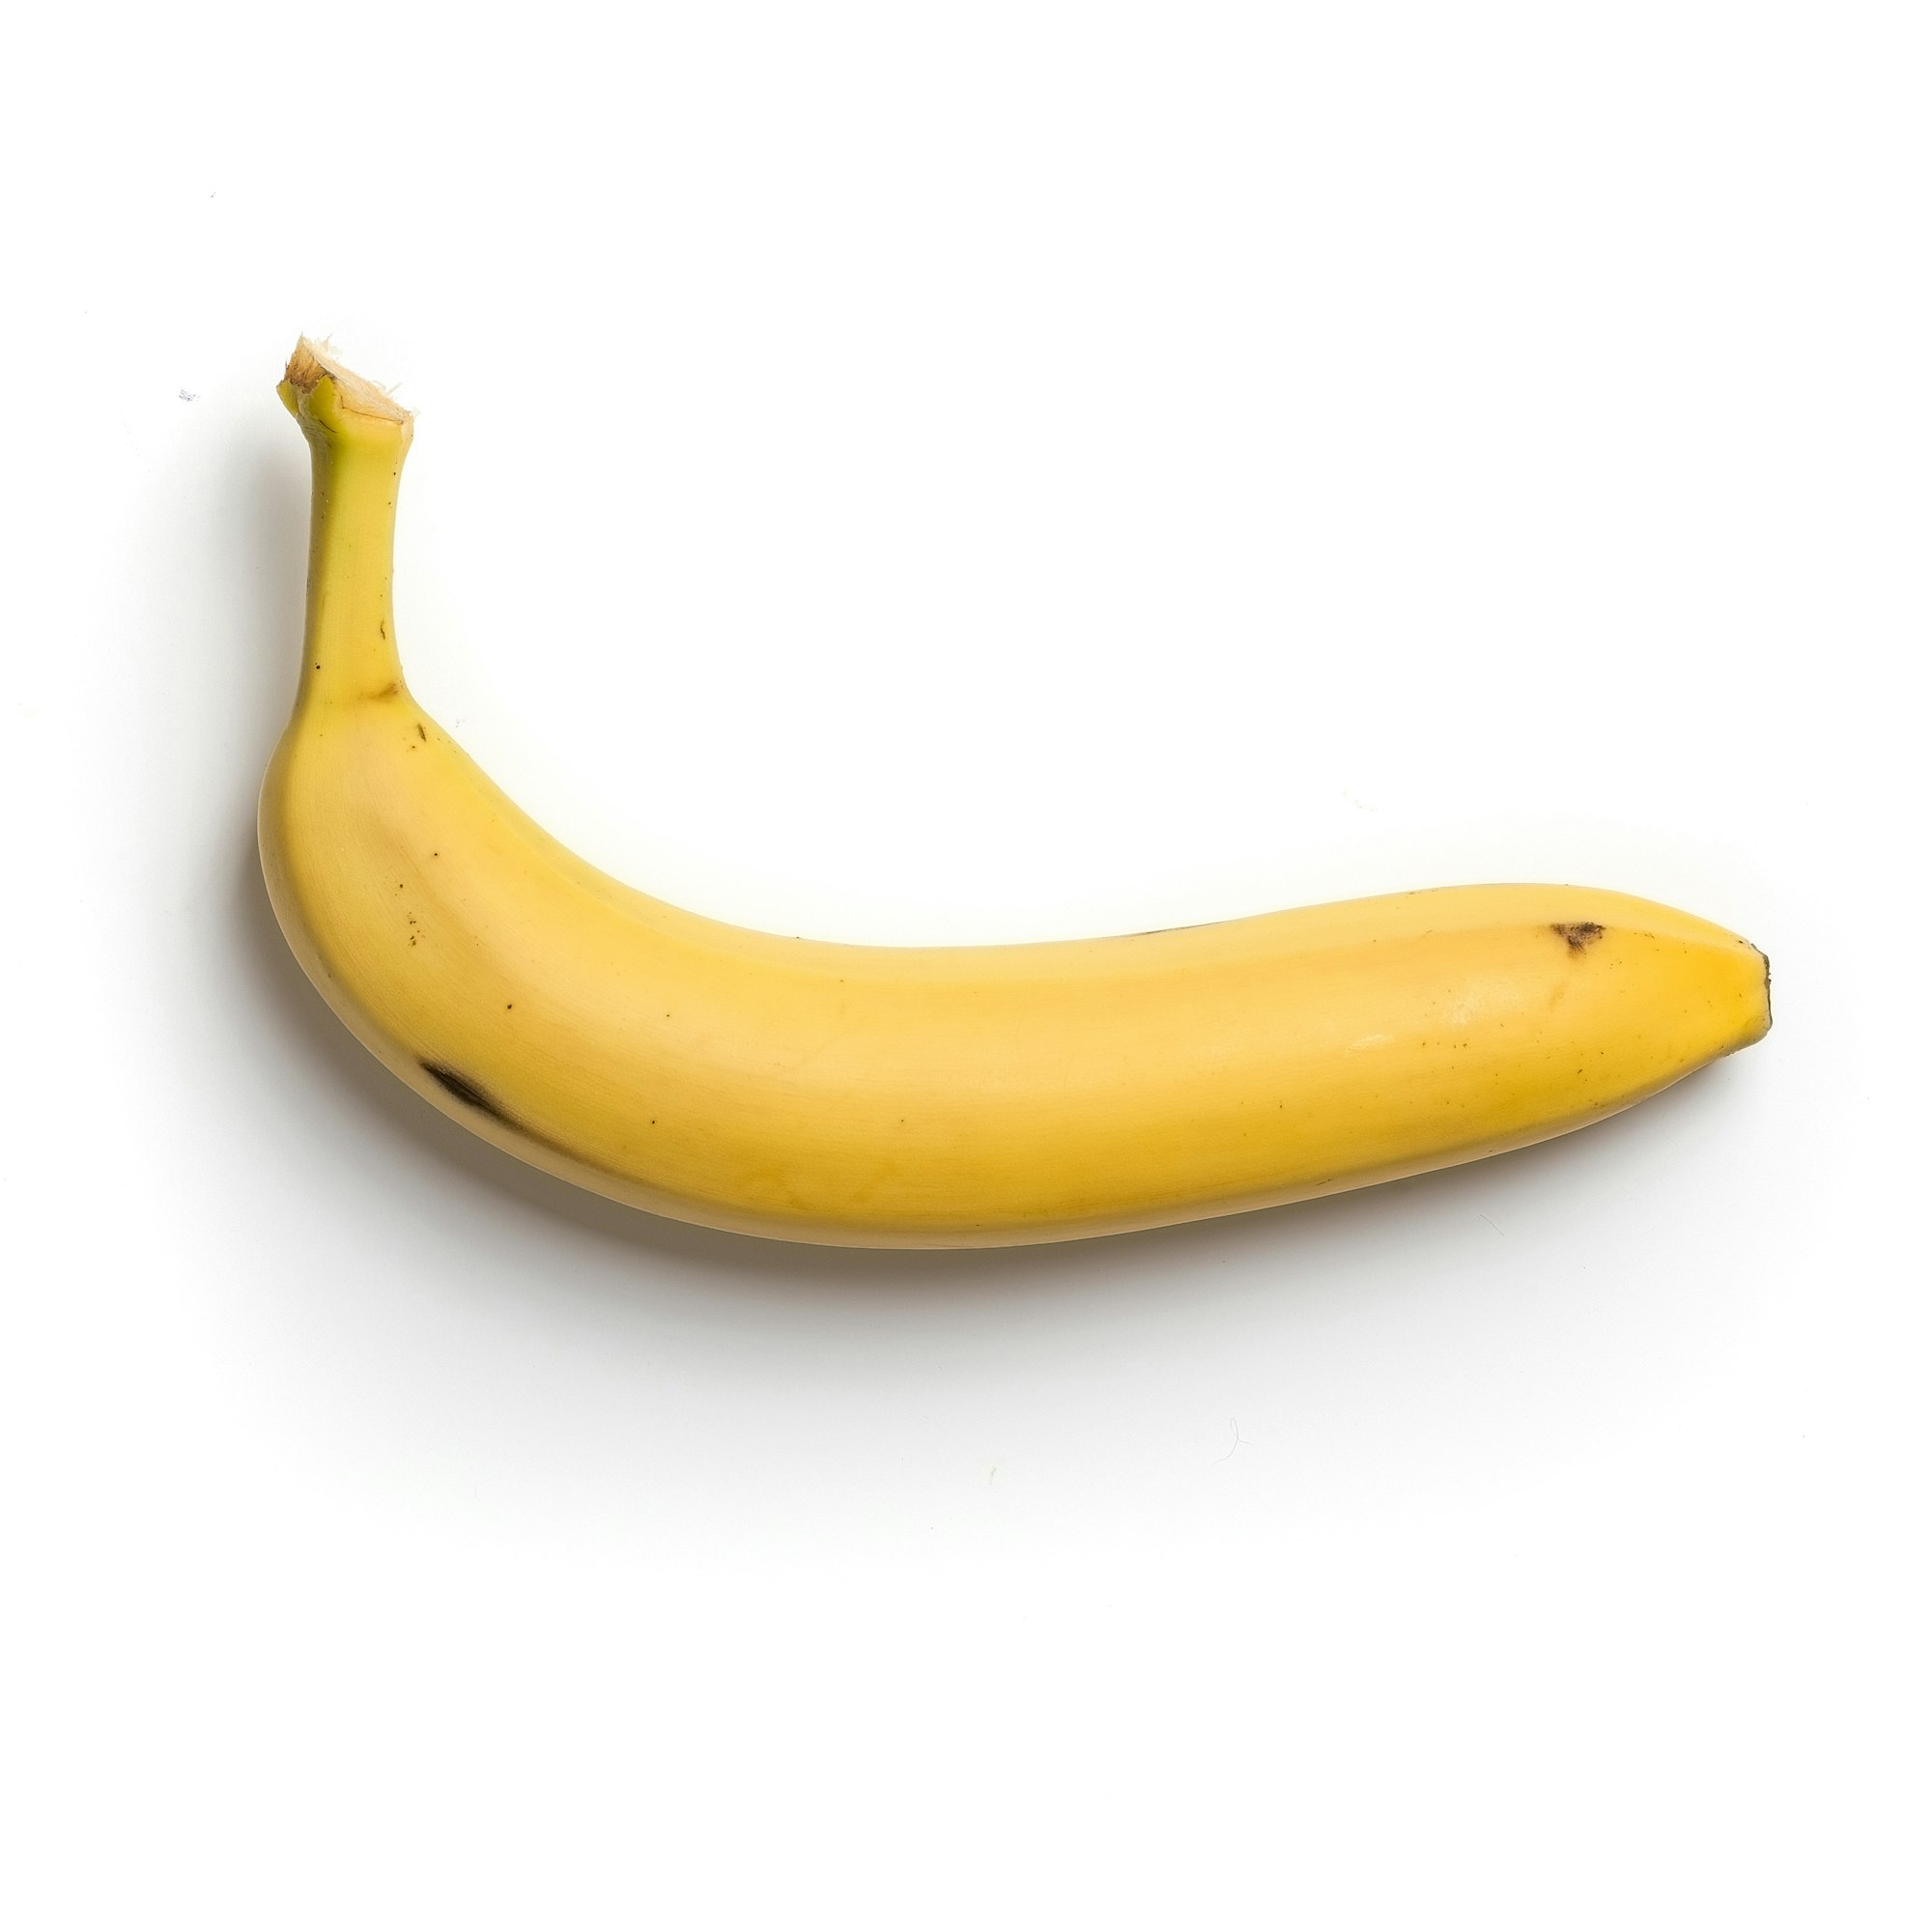 High-quality photo of a banana on a white background